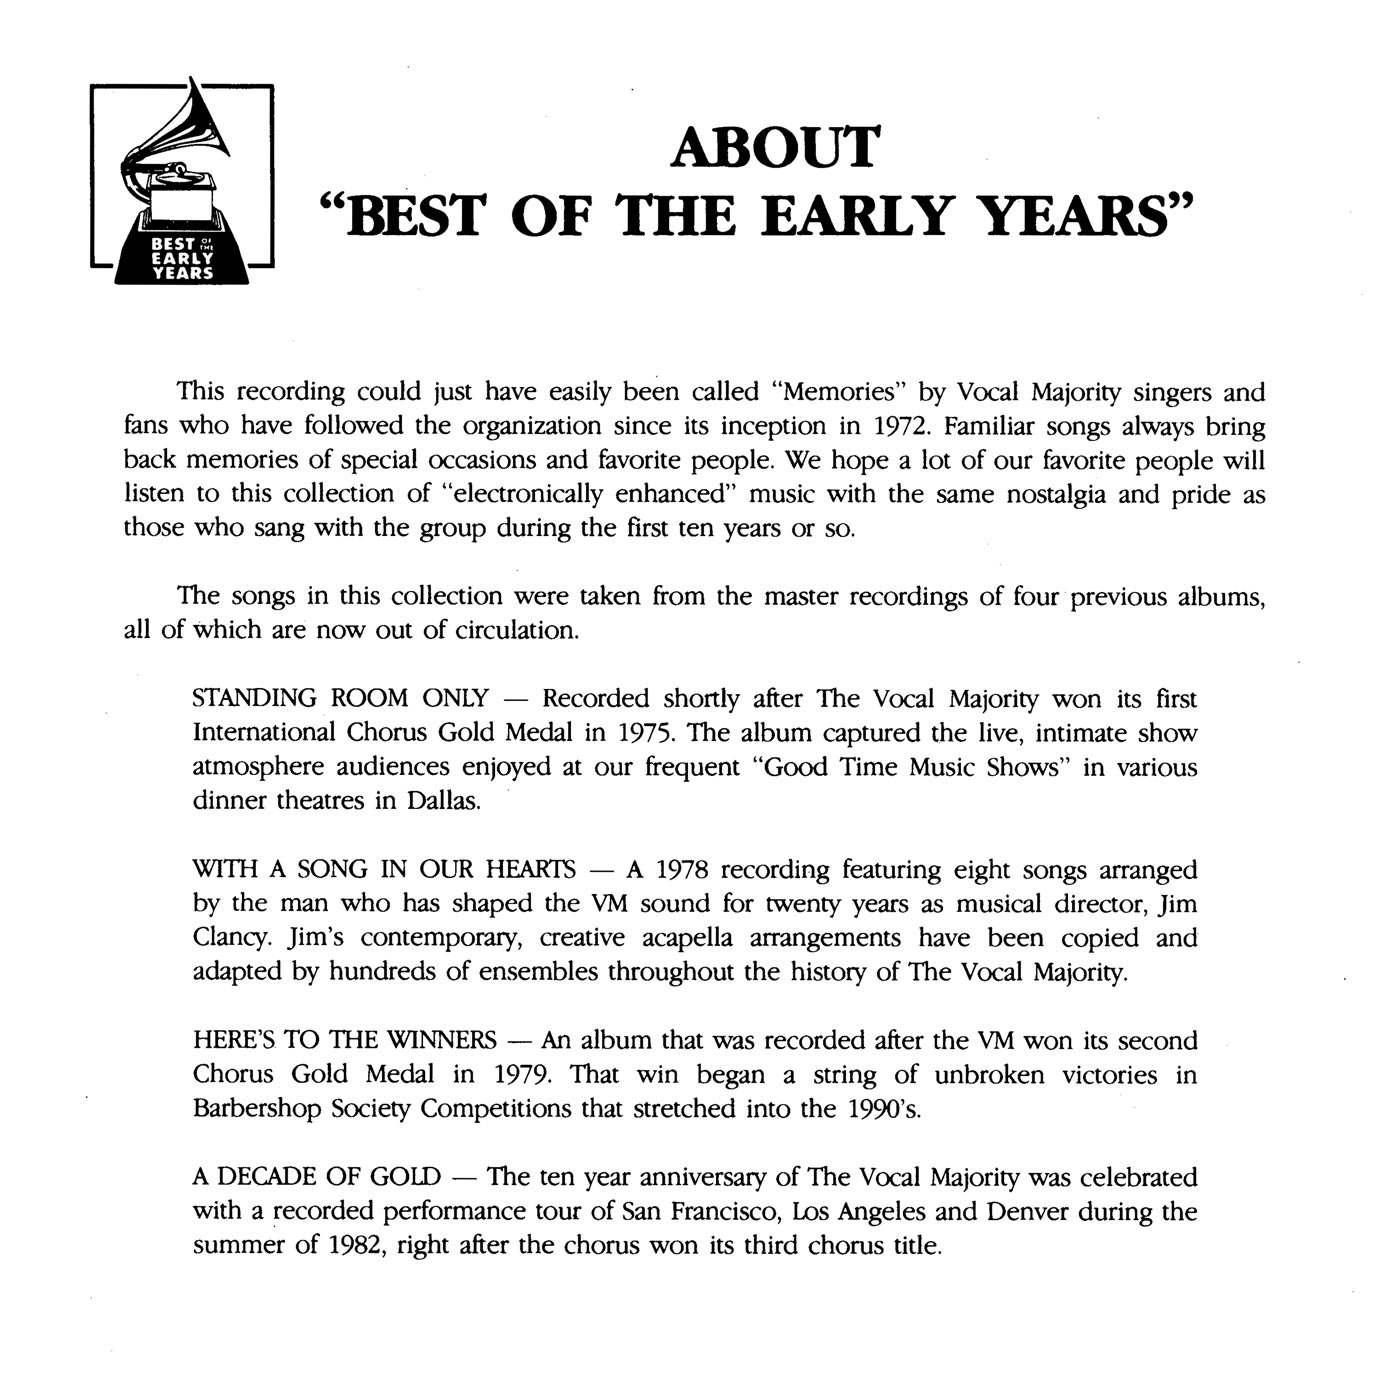 Booklet Inside Middle Panel: Best of the Early Years